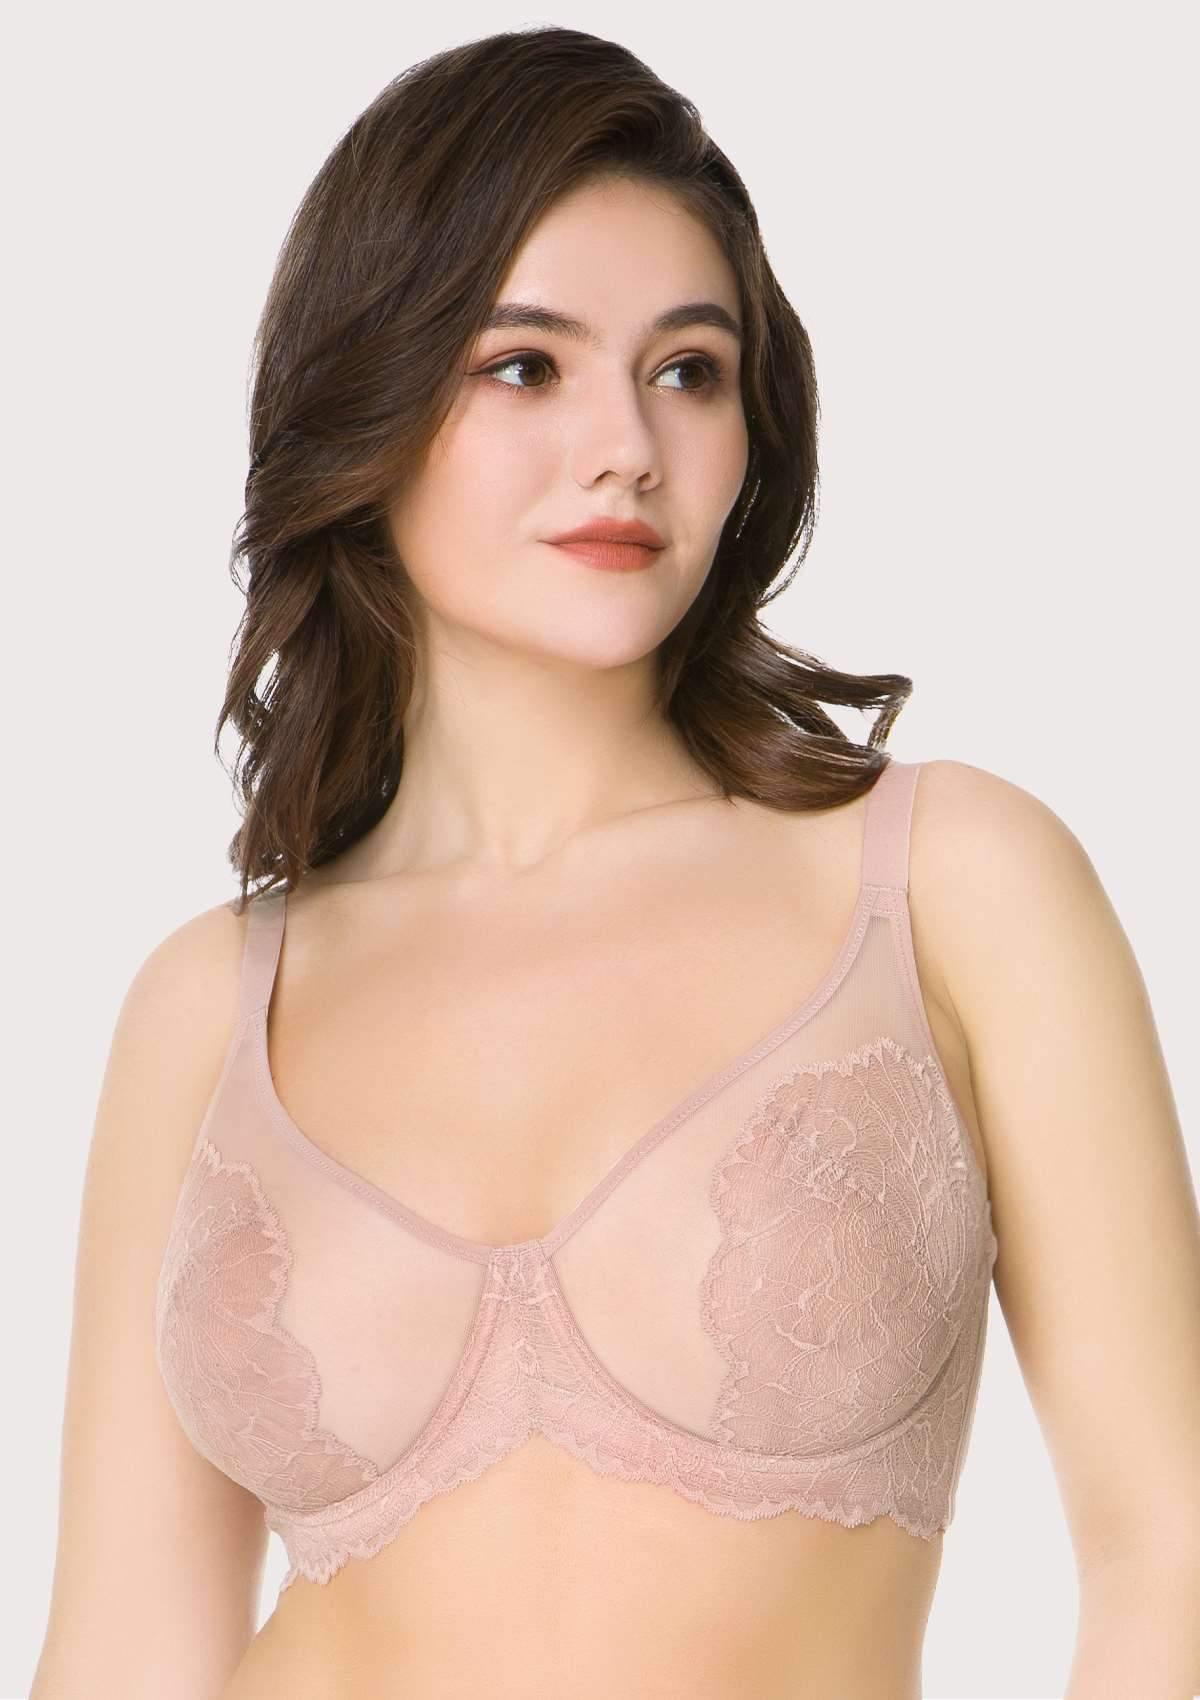 HSIA Blossom Lace Bra And Panties Set: Best Bra For Large Busts - Dark Pink / 34 / H